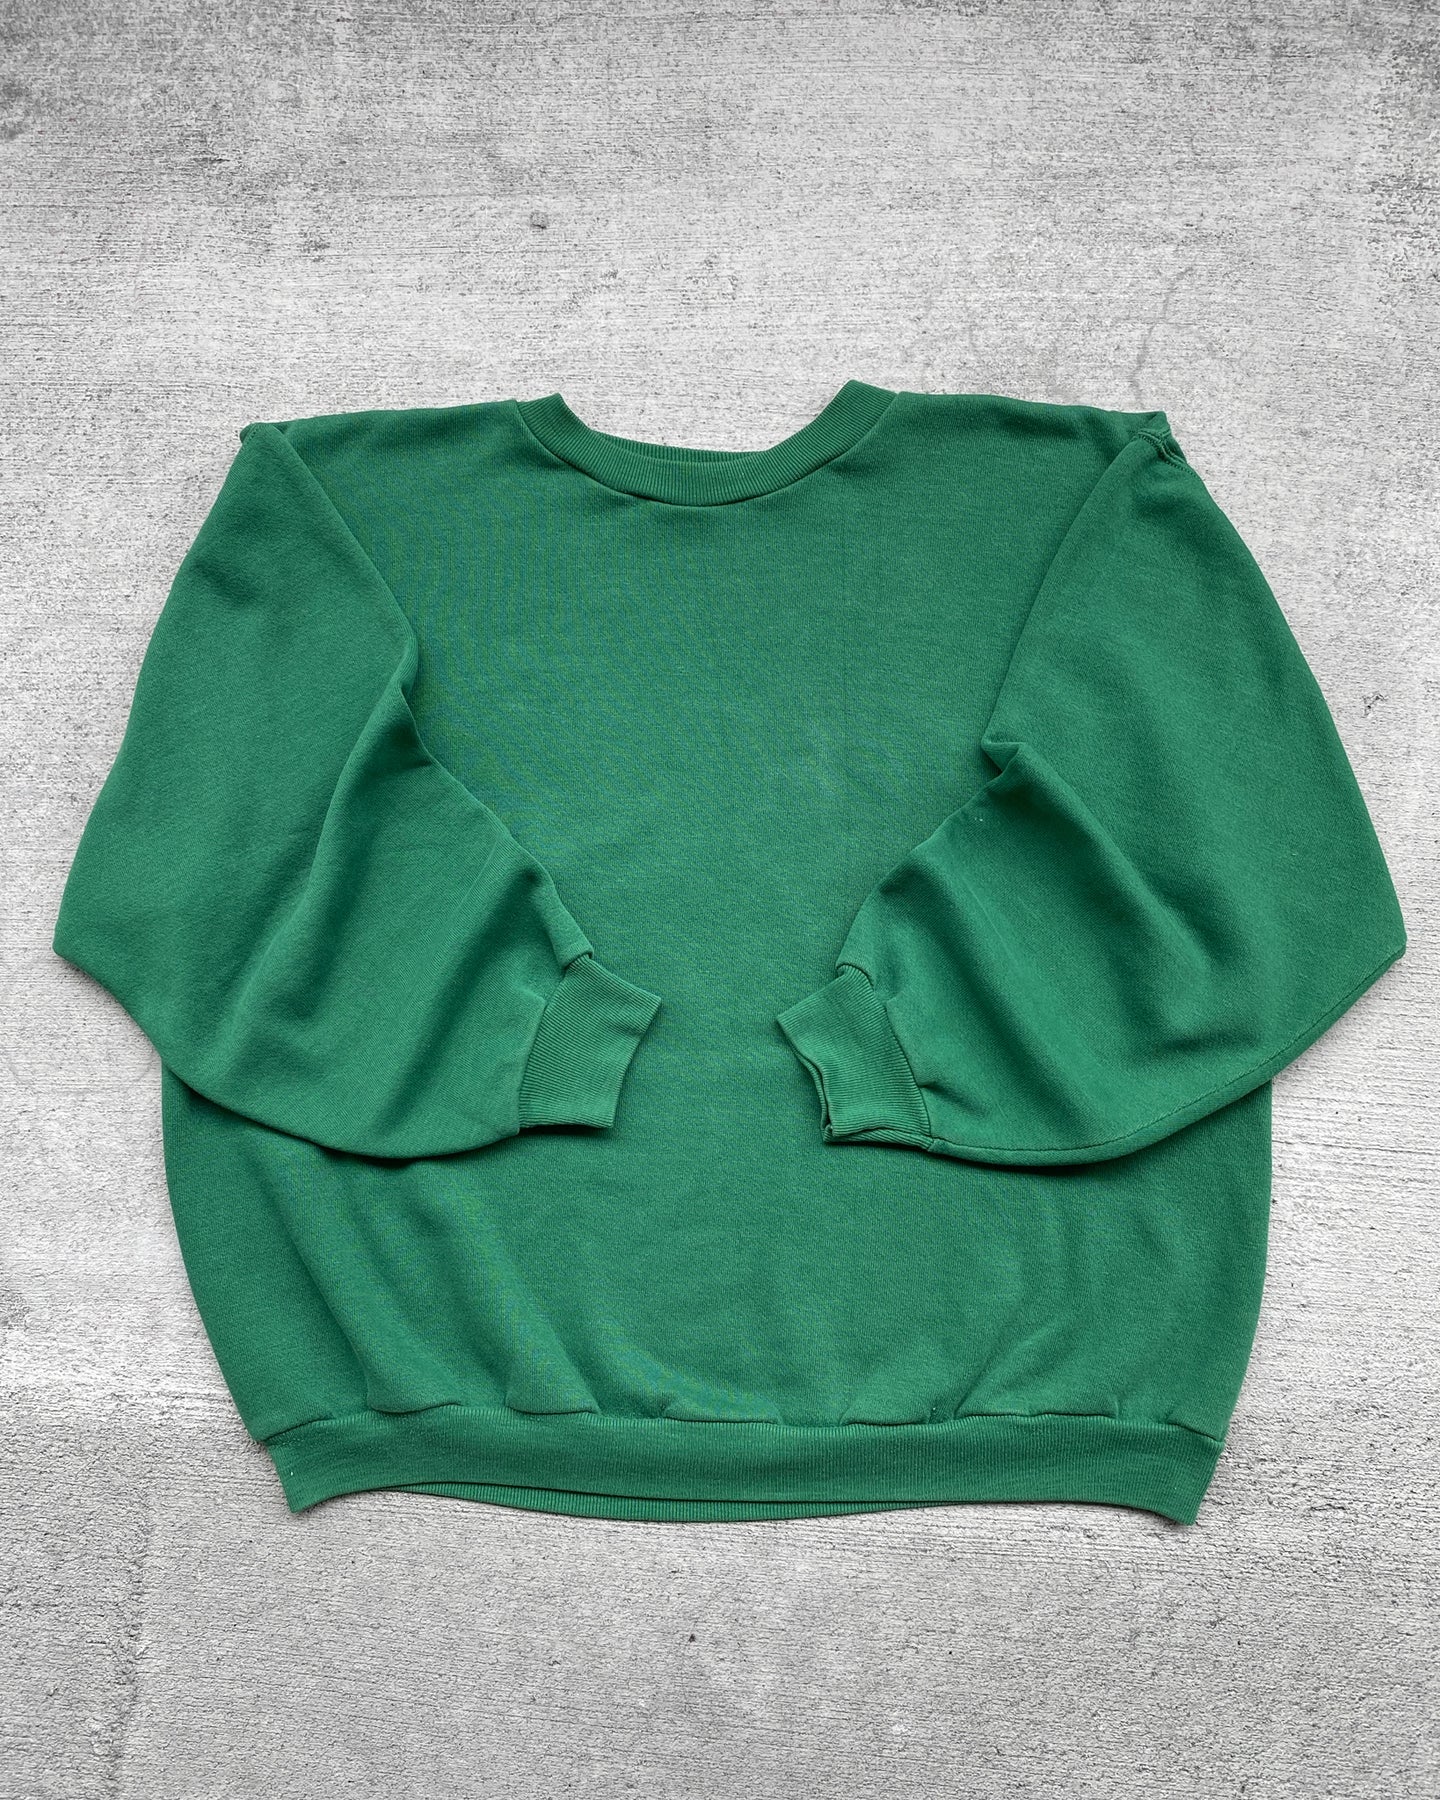 1970s Russell Athletic Kelly Green Crewneck - Size X-Large